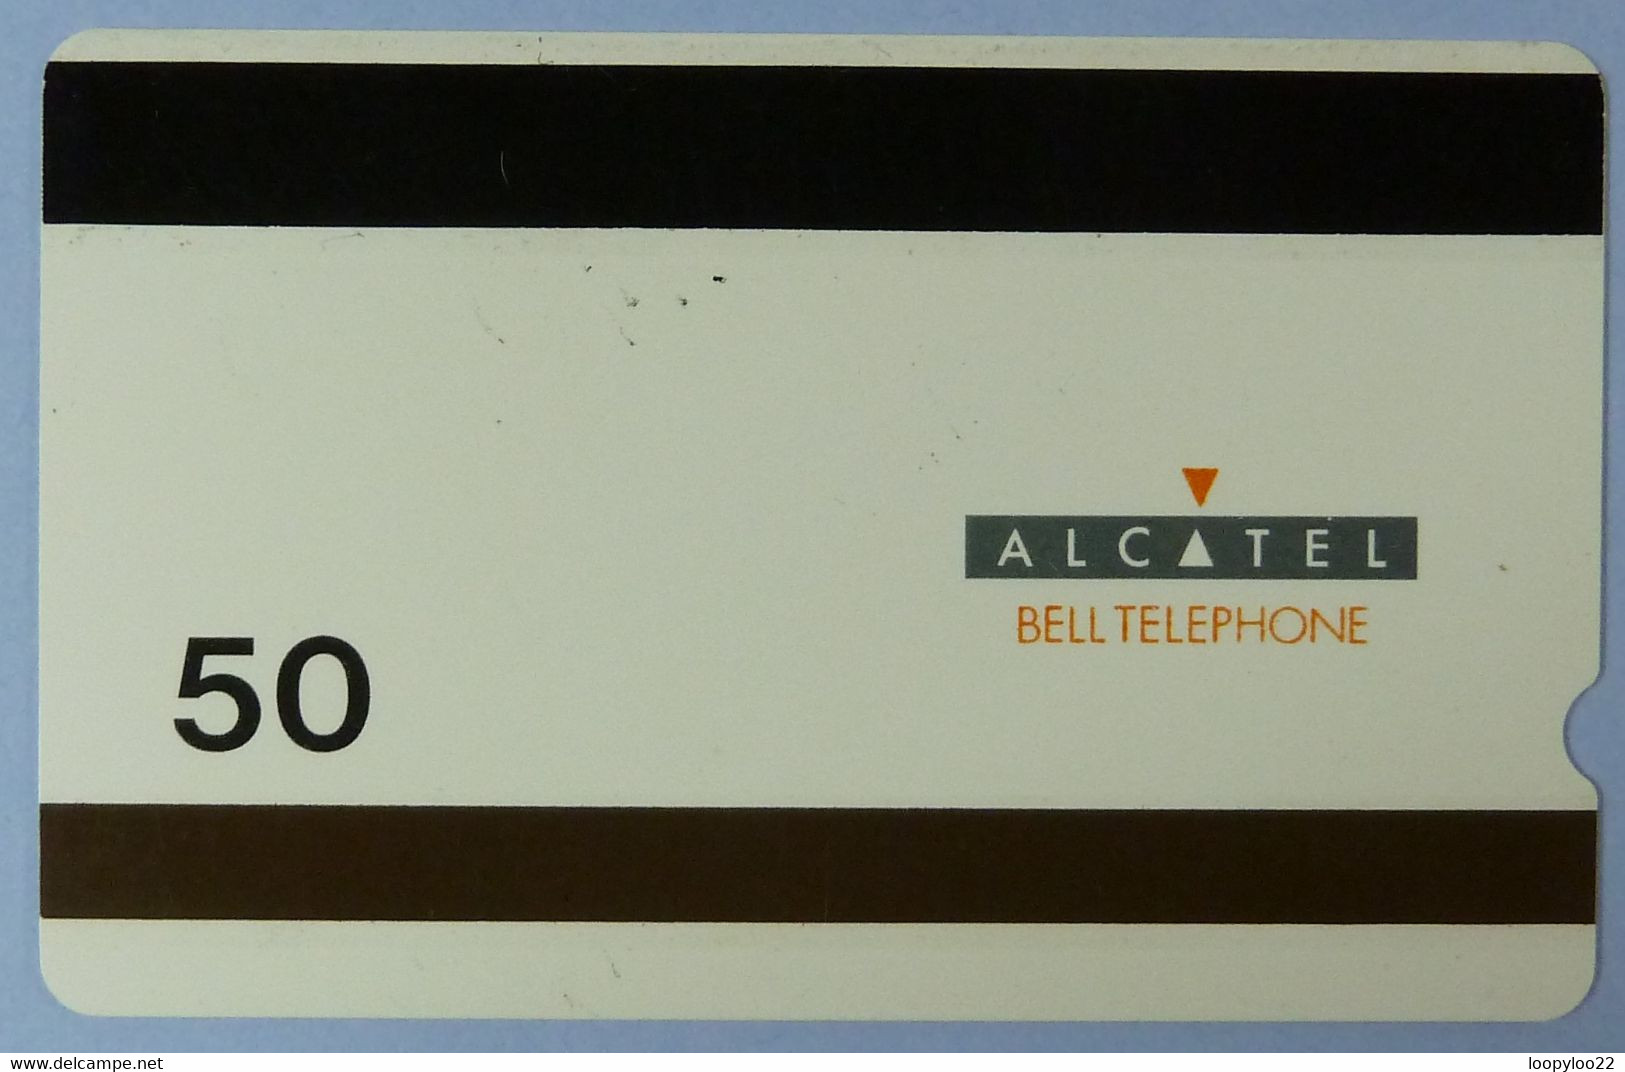 BELGIUM / POLAND- Alcatel - Credifaxphone (Man) - Magnetic - Field Trial / Test - 50 - Bell Telephone - Used - [3] Tests & Services